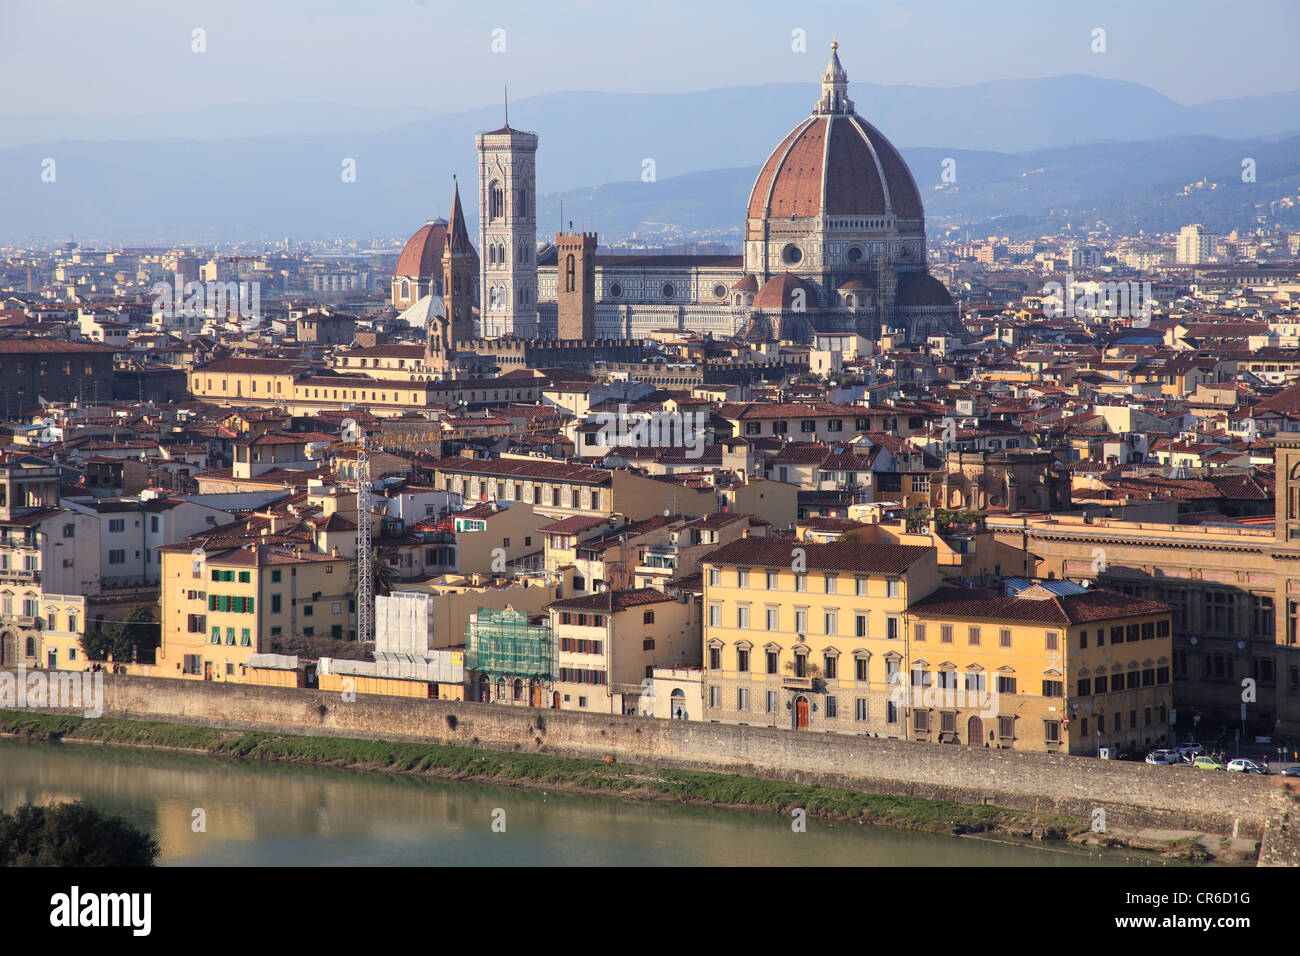 The Santa Maria del Fiore cathedral in Florence, Italy Stock Photo